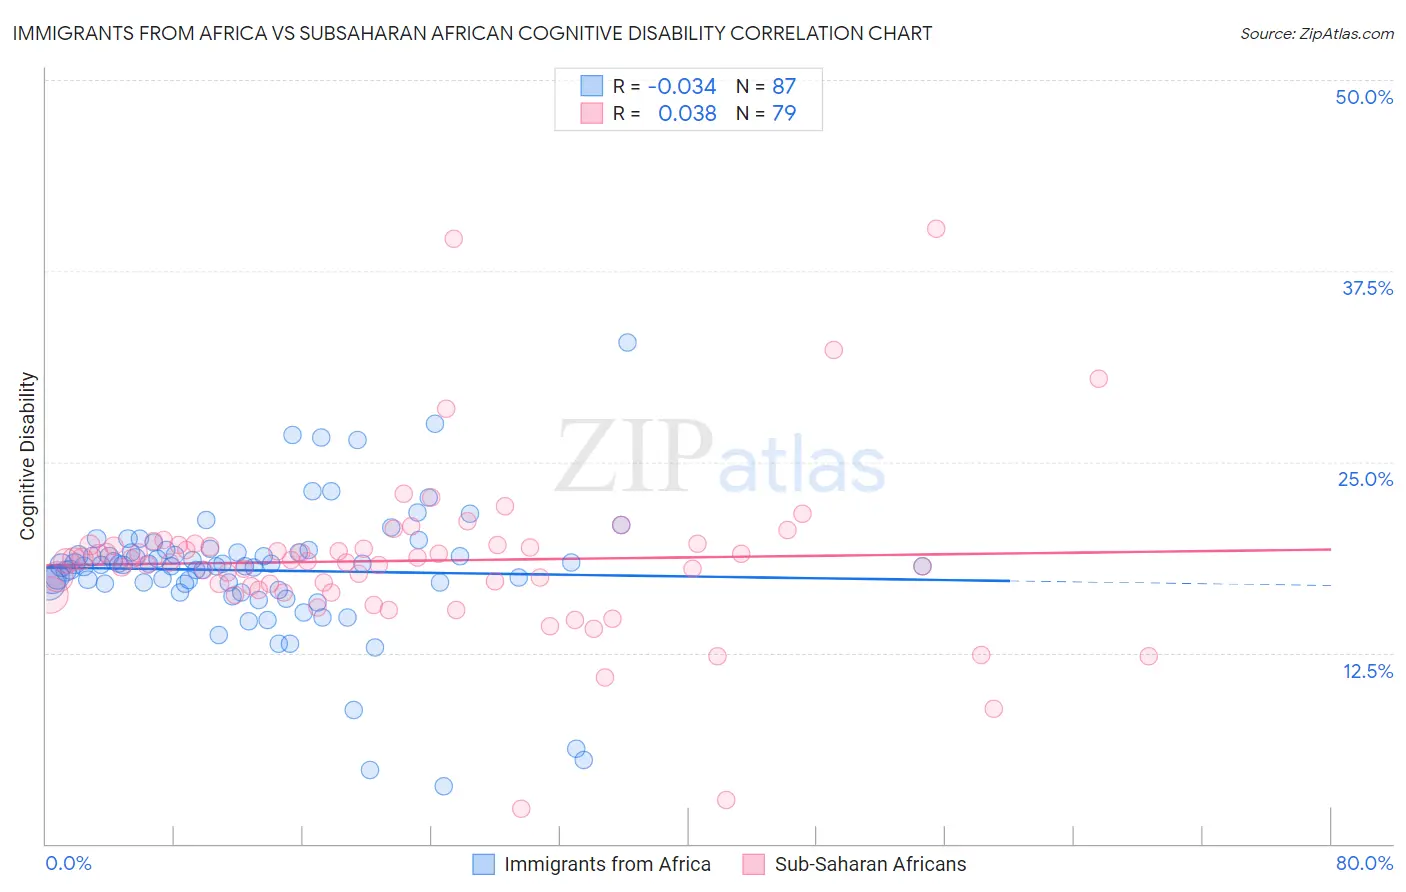 Immigrants from Africa vs Subsaharan African Cognitive Disability